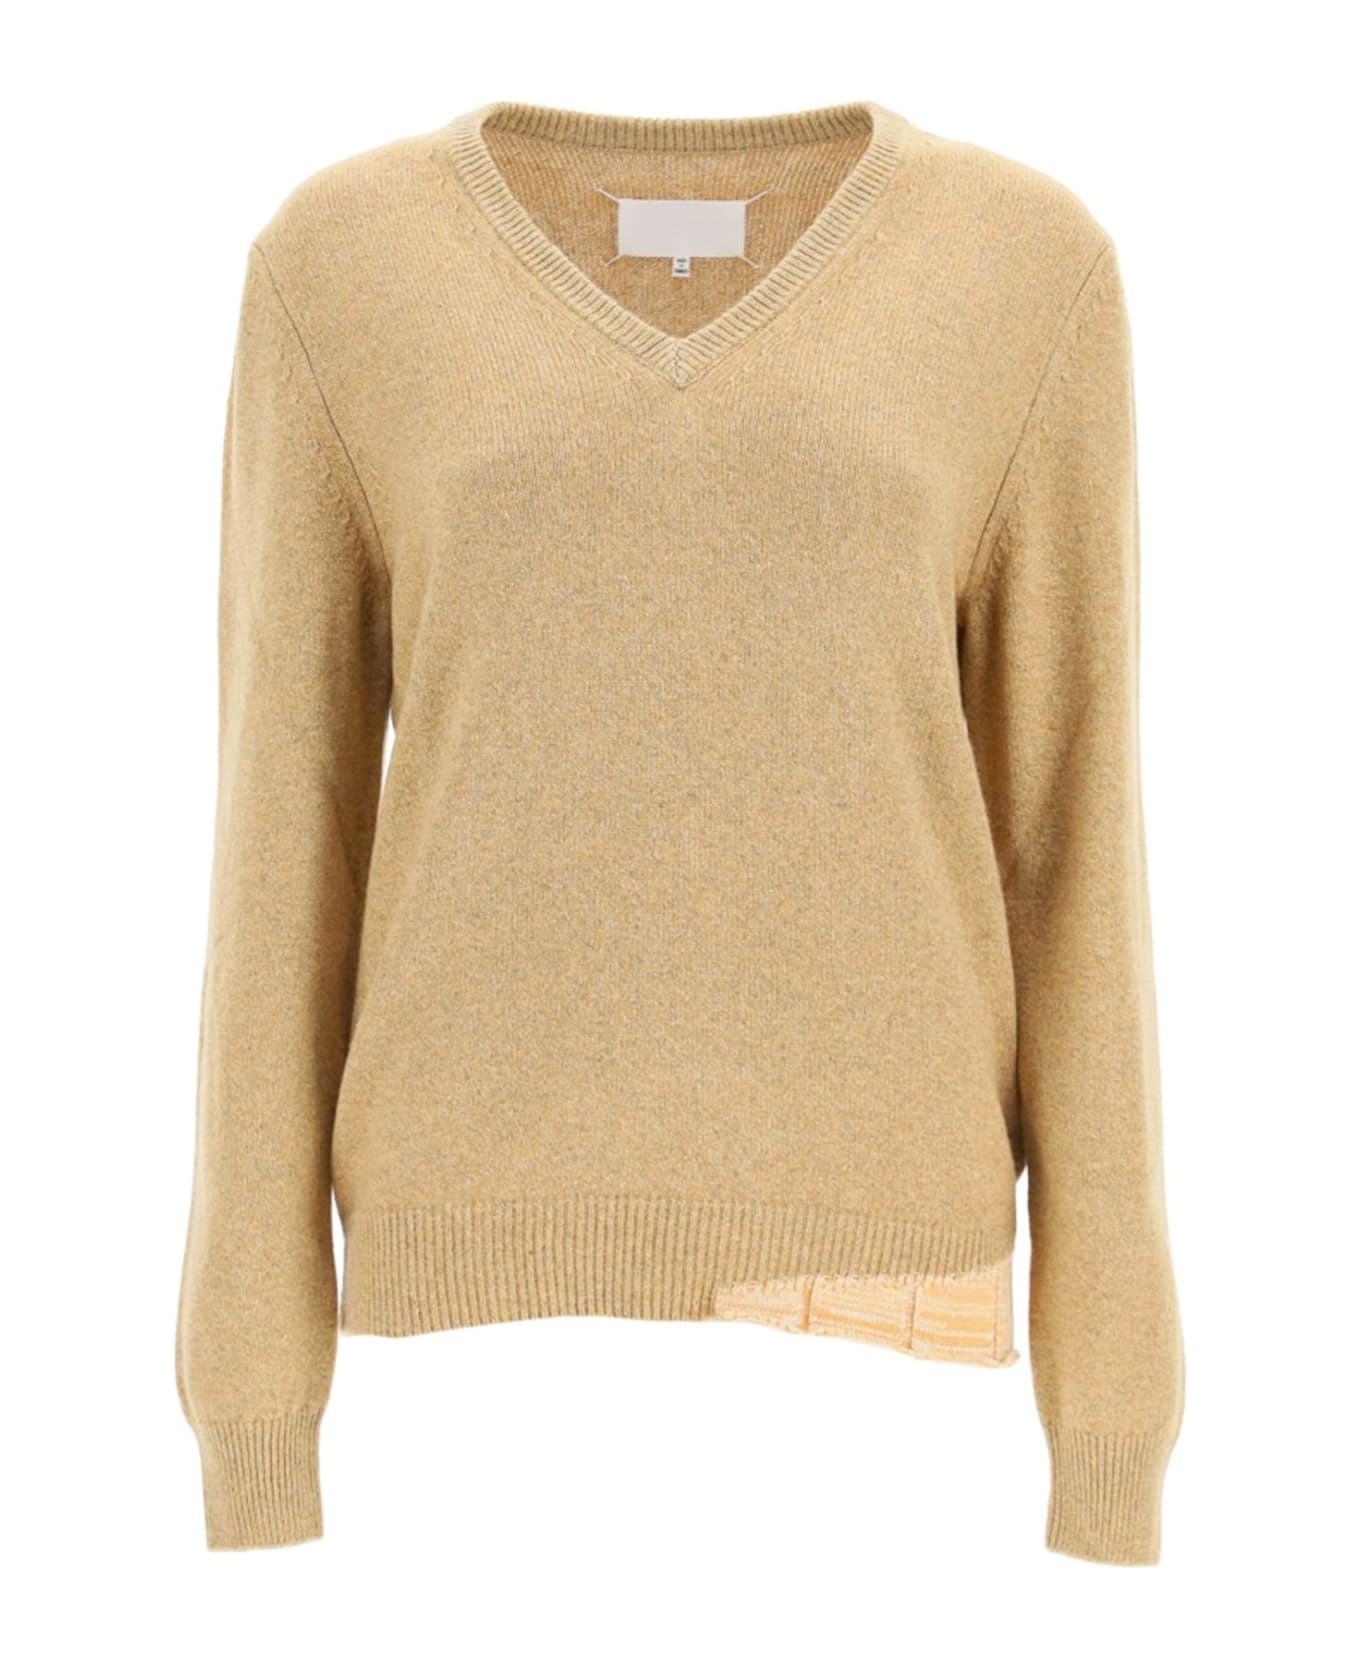 Maison Margiela Wool And Cashmere Sweater - Brown ニットウェア